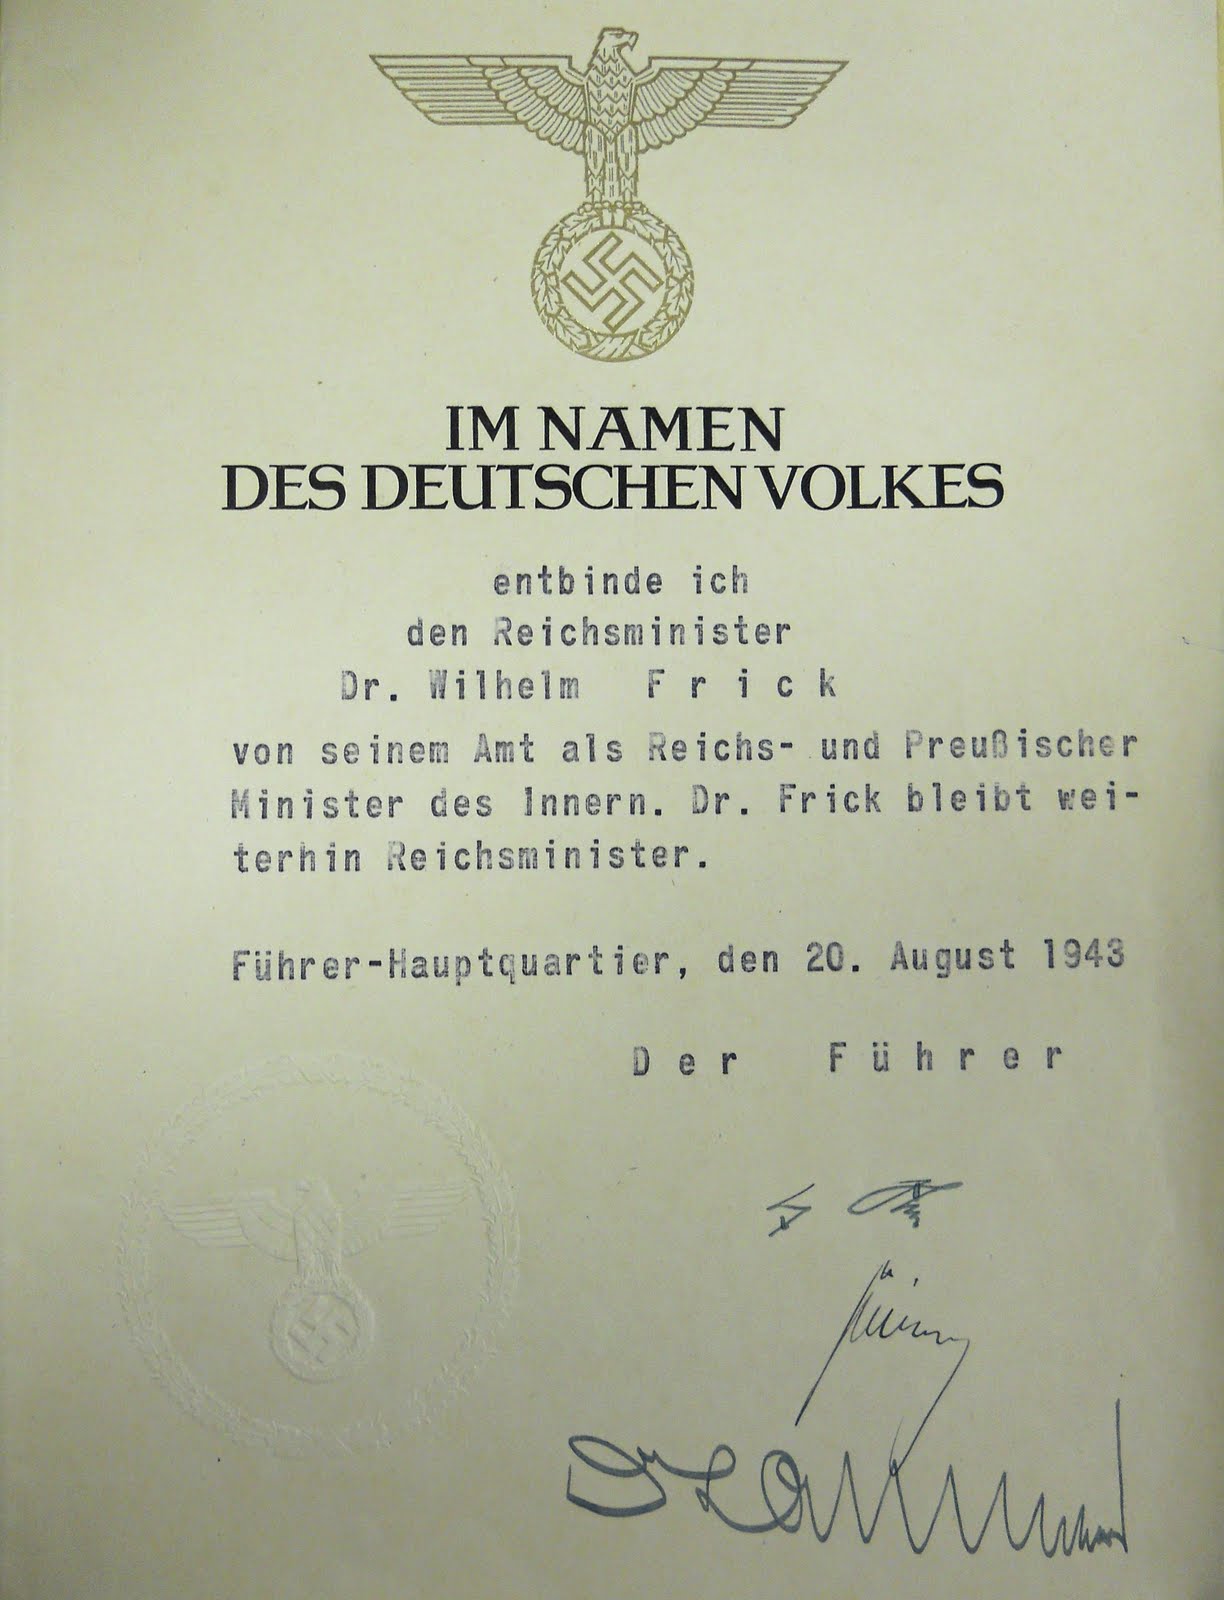 Official 1943 decree dismissing Wilhelm Frick from his position as Minister des Innern (Minister of the Interior)